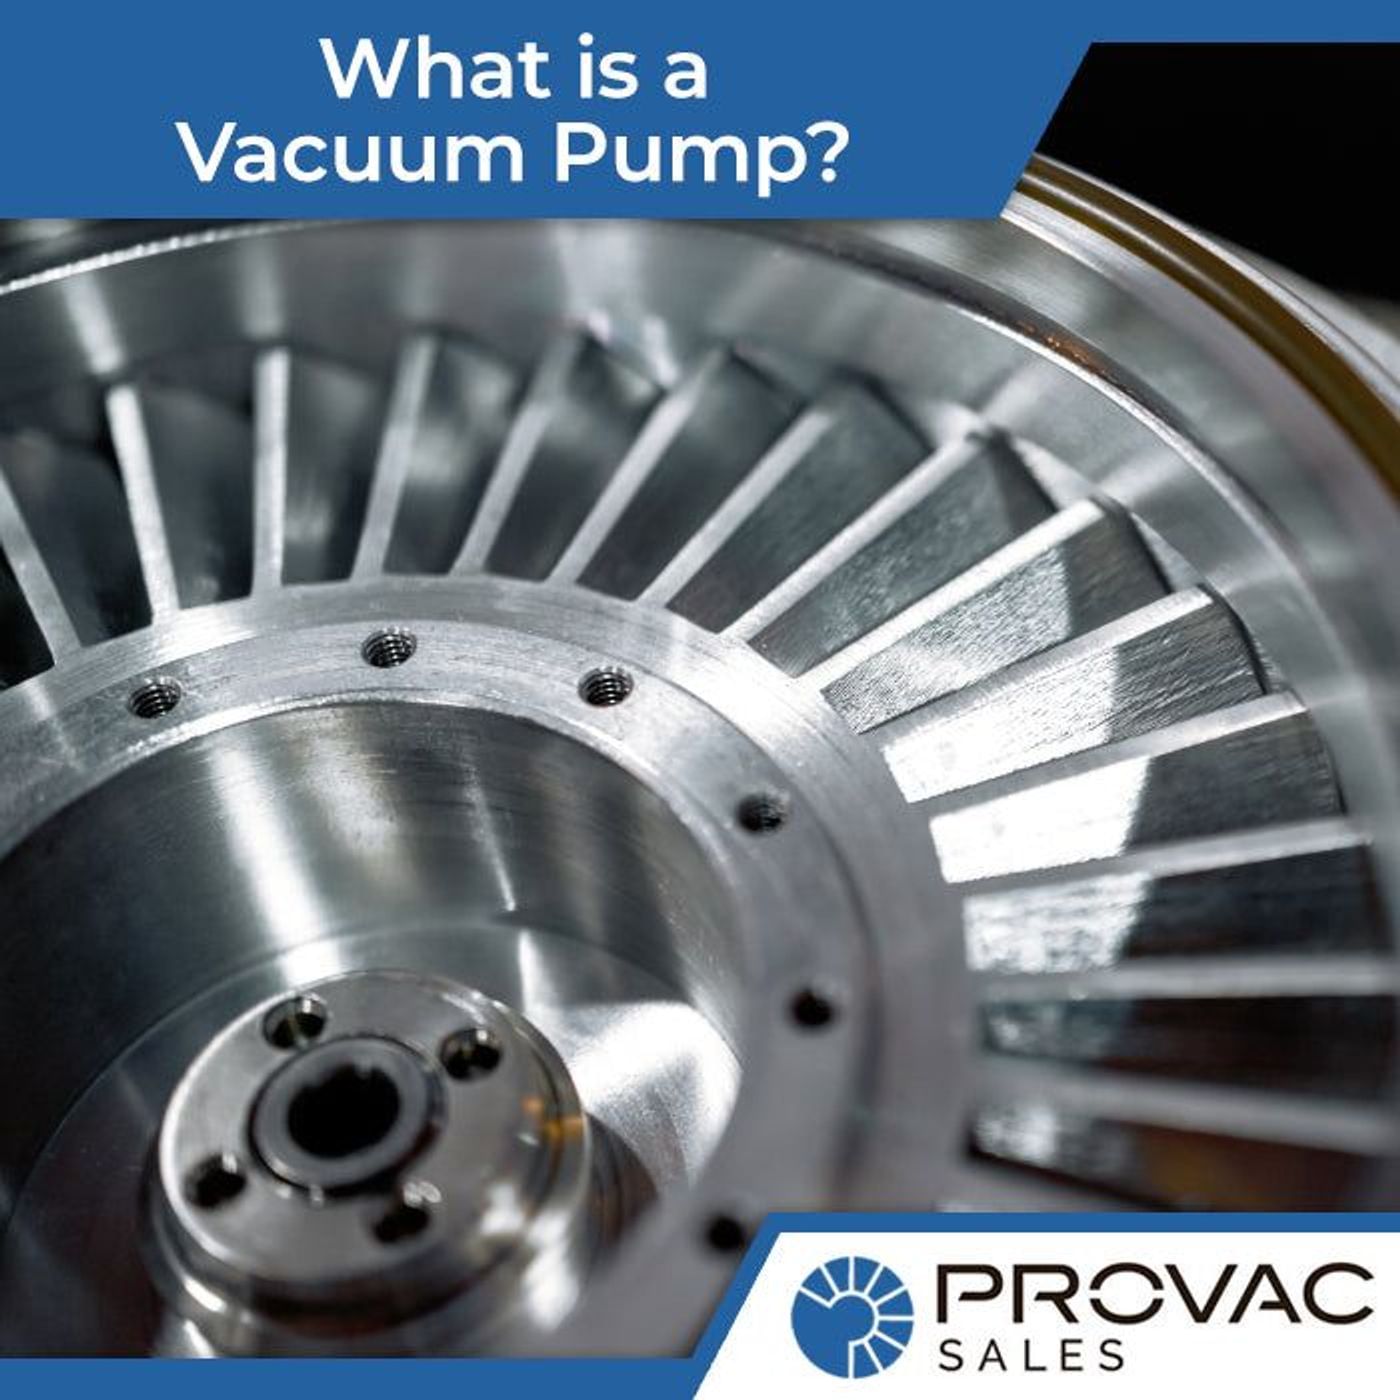 What Is a Vacuum Pump? Detailed Introduction & Terminology